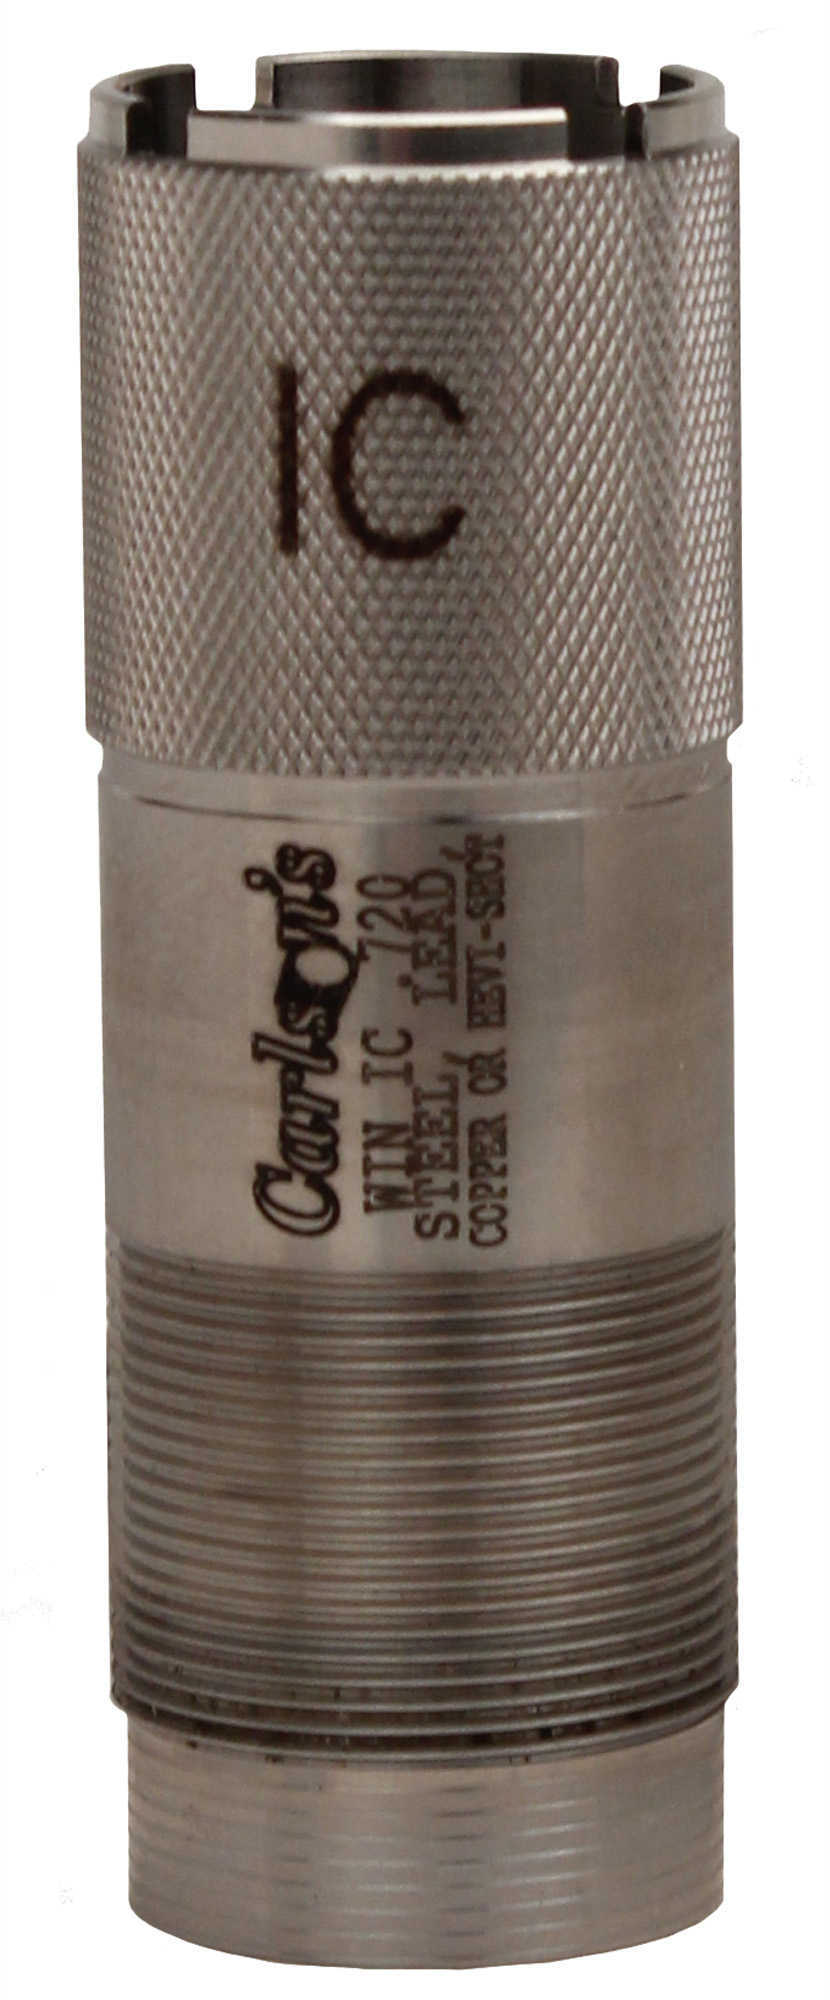 Carlsons Sporting Clays Choke Tube 12 ga. Winchester Improved Cylinder